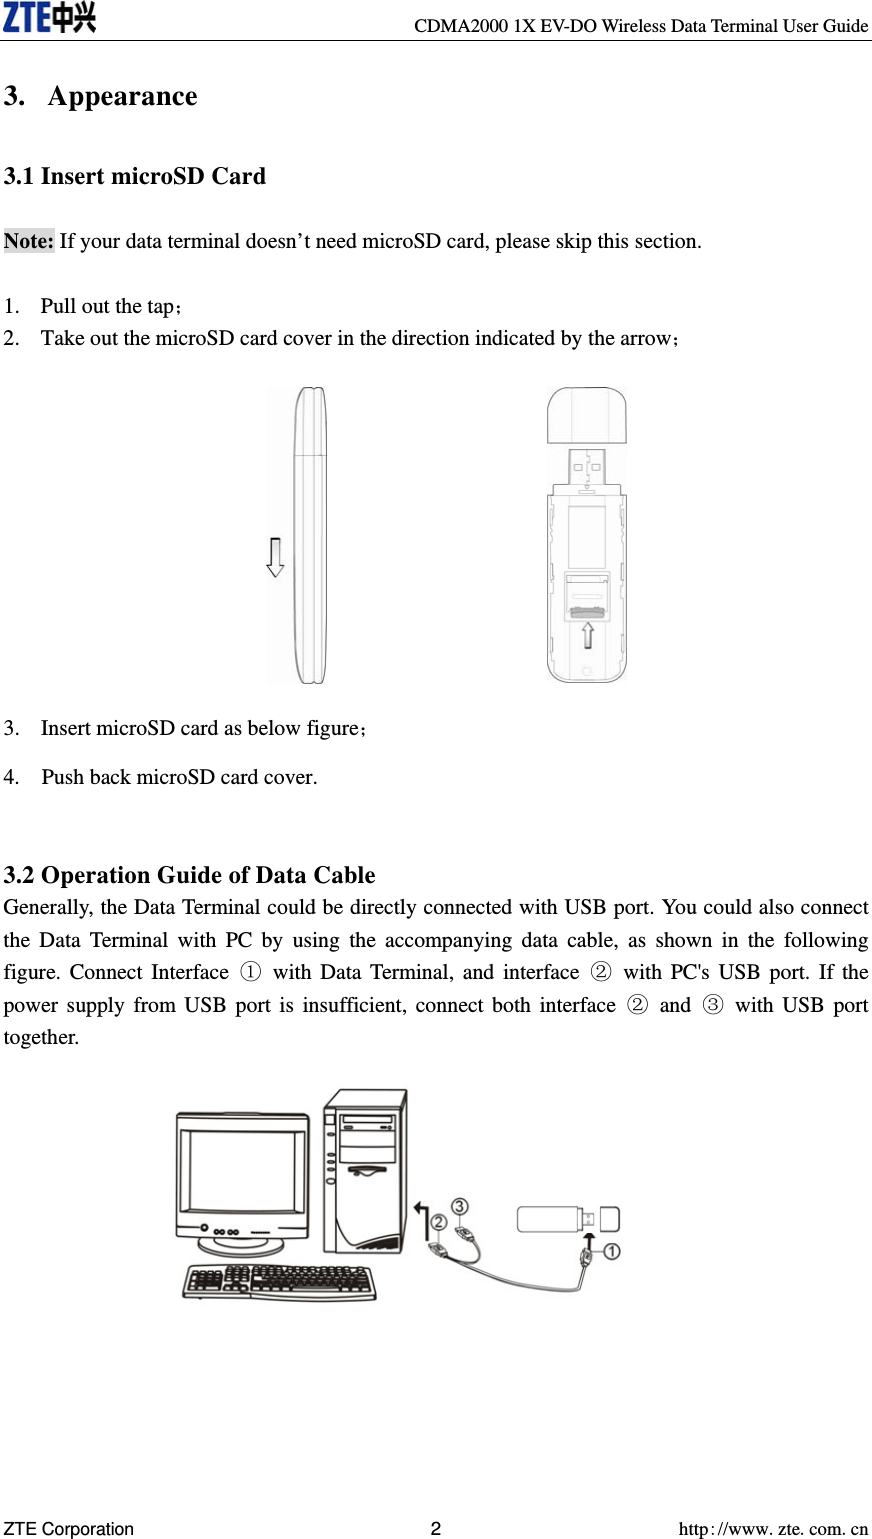     CDMA2000 1X EV-DO Wireless Data Terminal User Guide ZTE Corporation 2 http://www.zte.com.cn  3. Appearance  3.1 Insert microSD Card  Note: If your data terminal doesn’t need microSD card, please skip this section.  1. Pull out the tap； 2. Take out the microSD card cover in the direction indicated by the arrow；            3. Insert microSD card as below figure； 4.    Push back microSD card cover.   3.2 Operation Guide of Data Cable Generally, the Data Terminal could be directly connected with USB port. You could also connect the Data Terminal with PC by using the accompanying data cable, as shown in the following figure. Connect Interface  with Data Terminal, and interface  with PC&apos;s USB port. If the power supply from USB port is insufficient, connect both interface  and  with USB port together.            